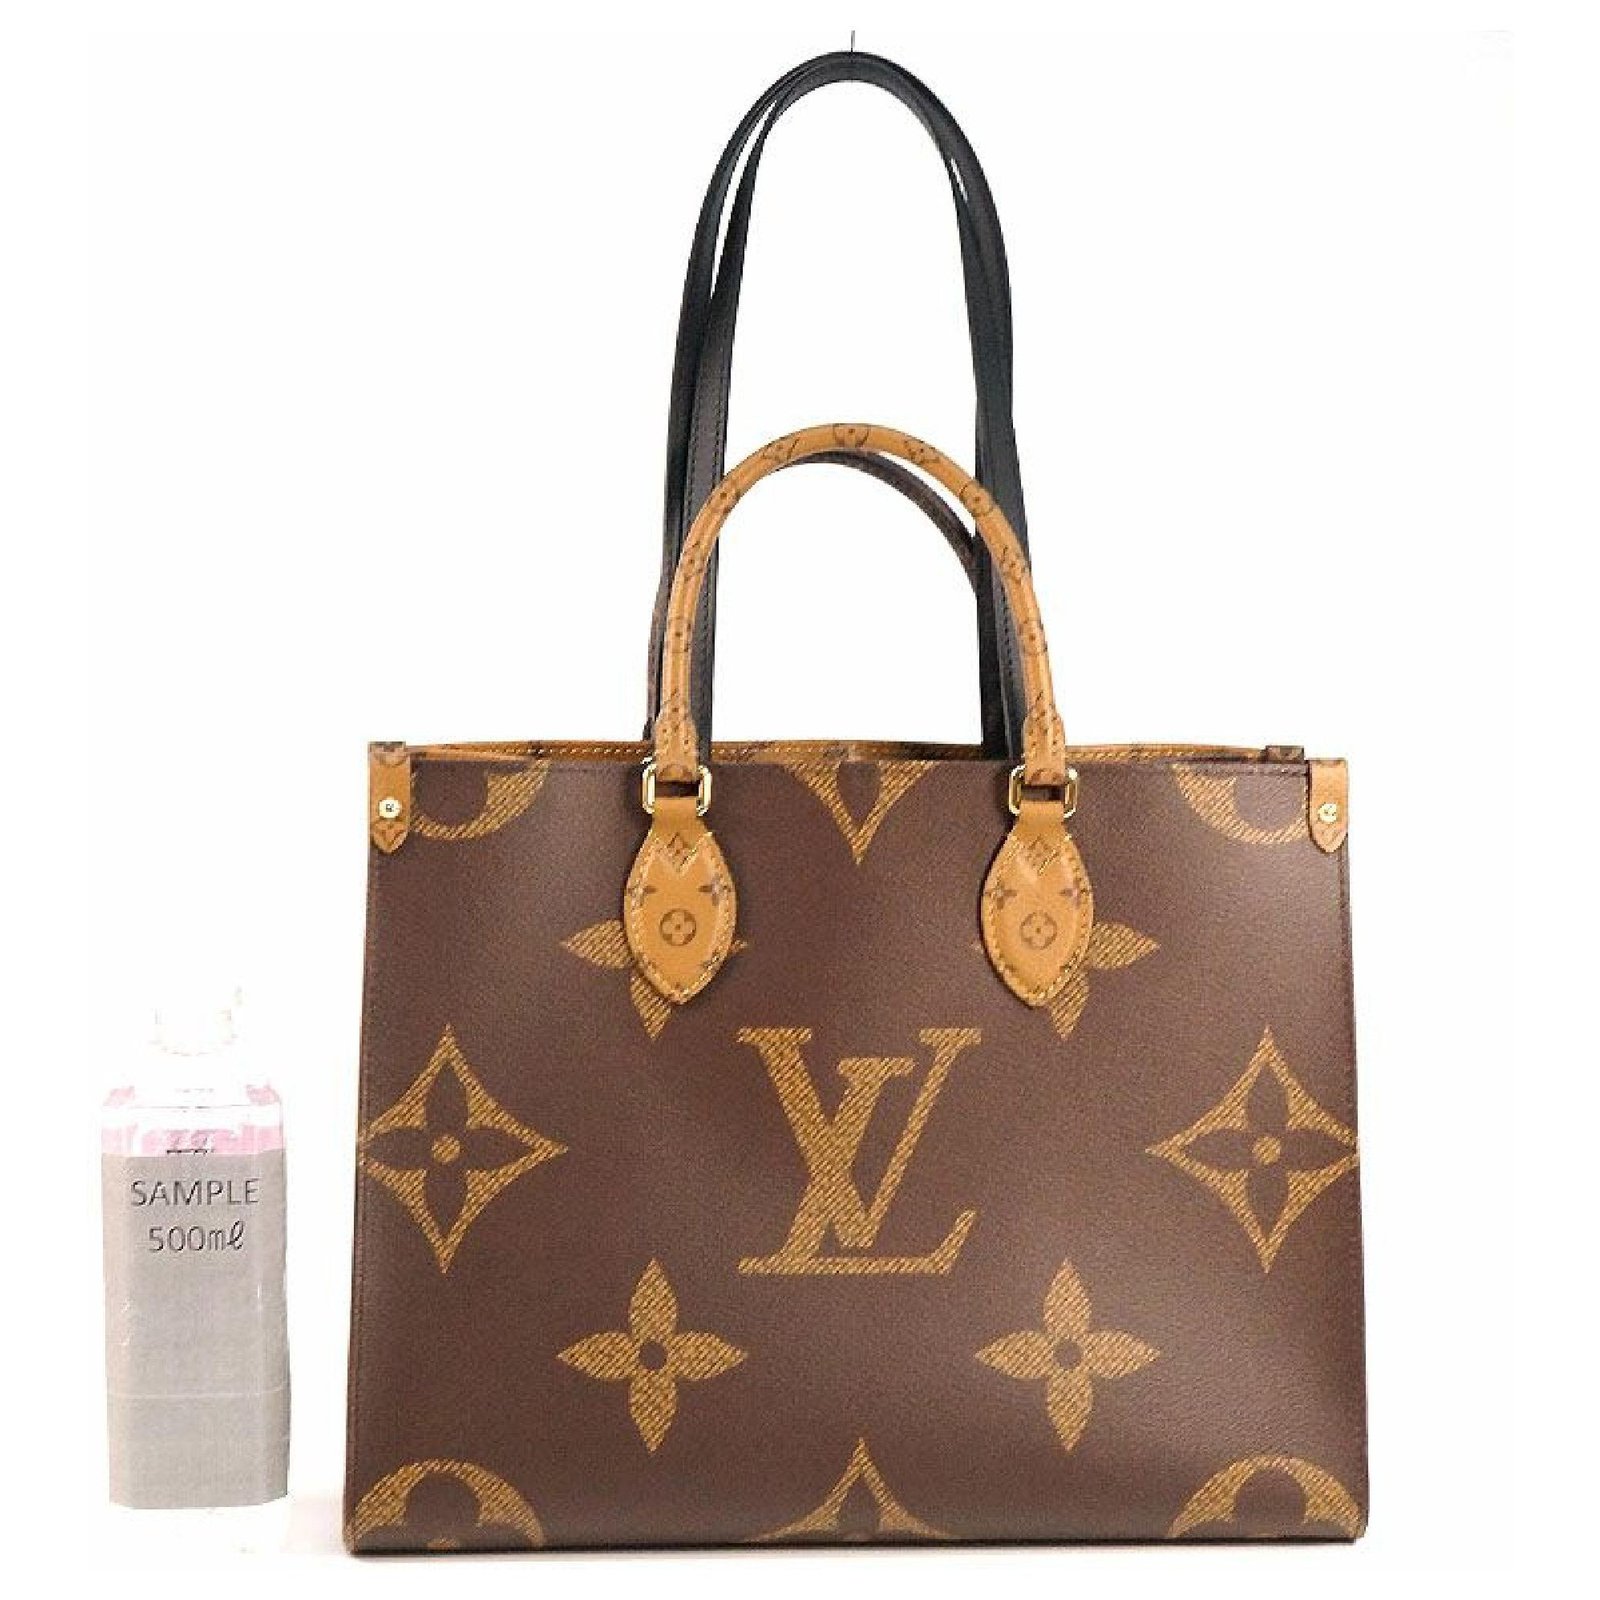 Louis Vuitton On The Go Mm Size